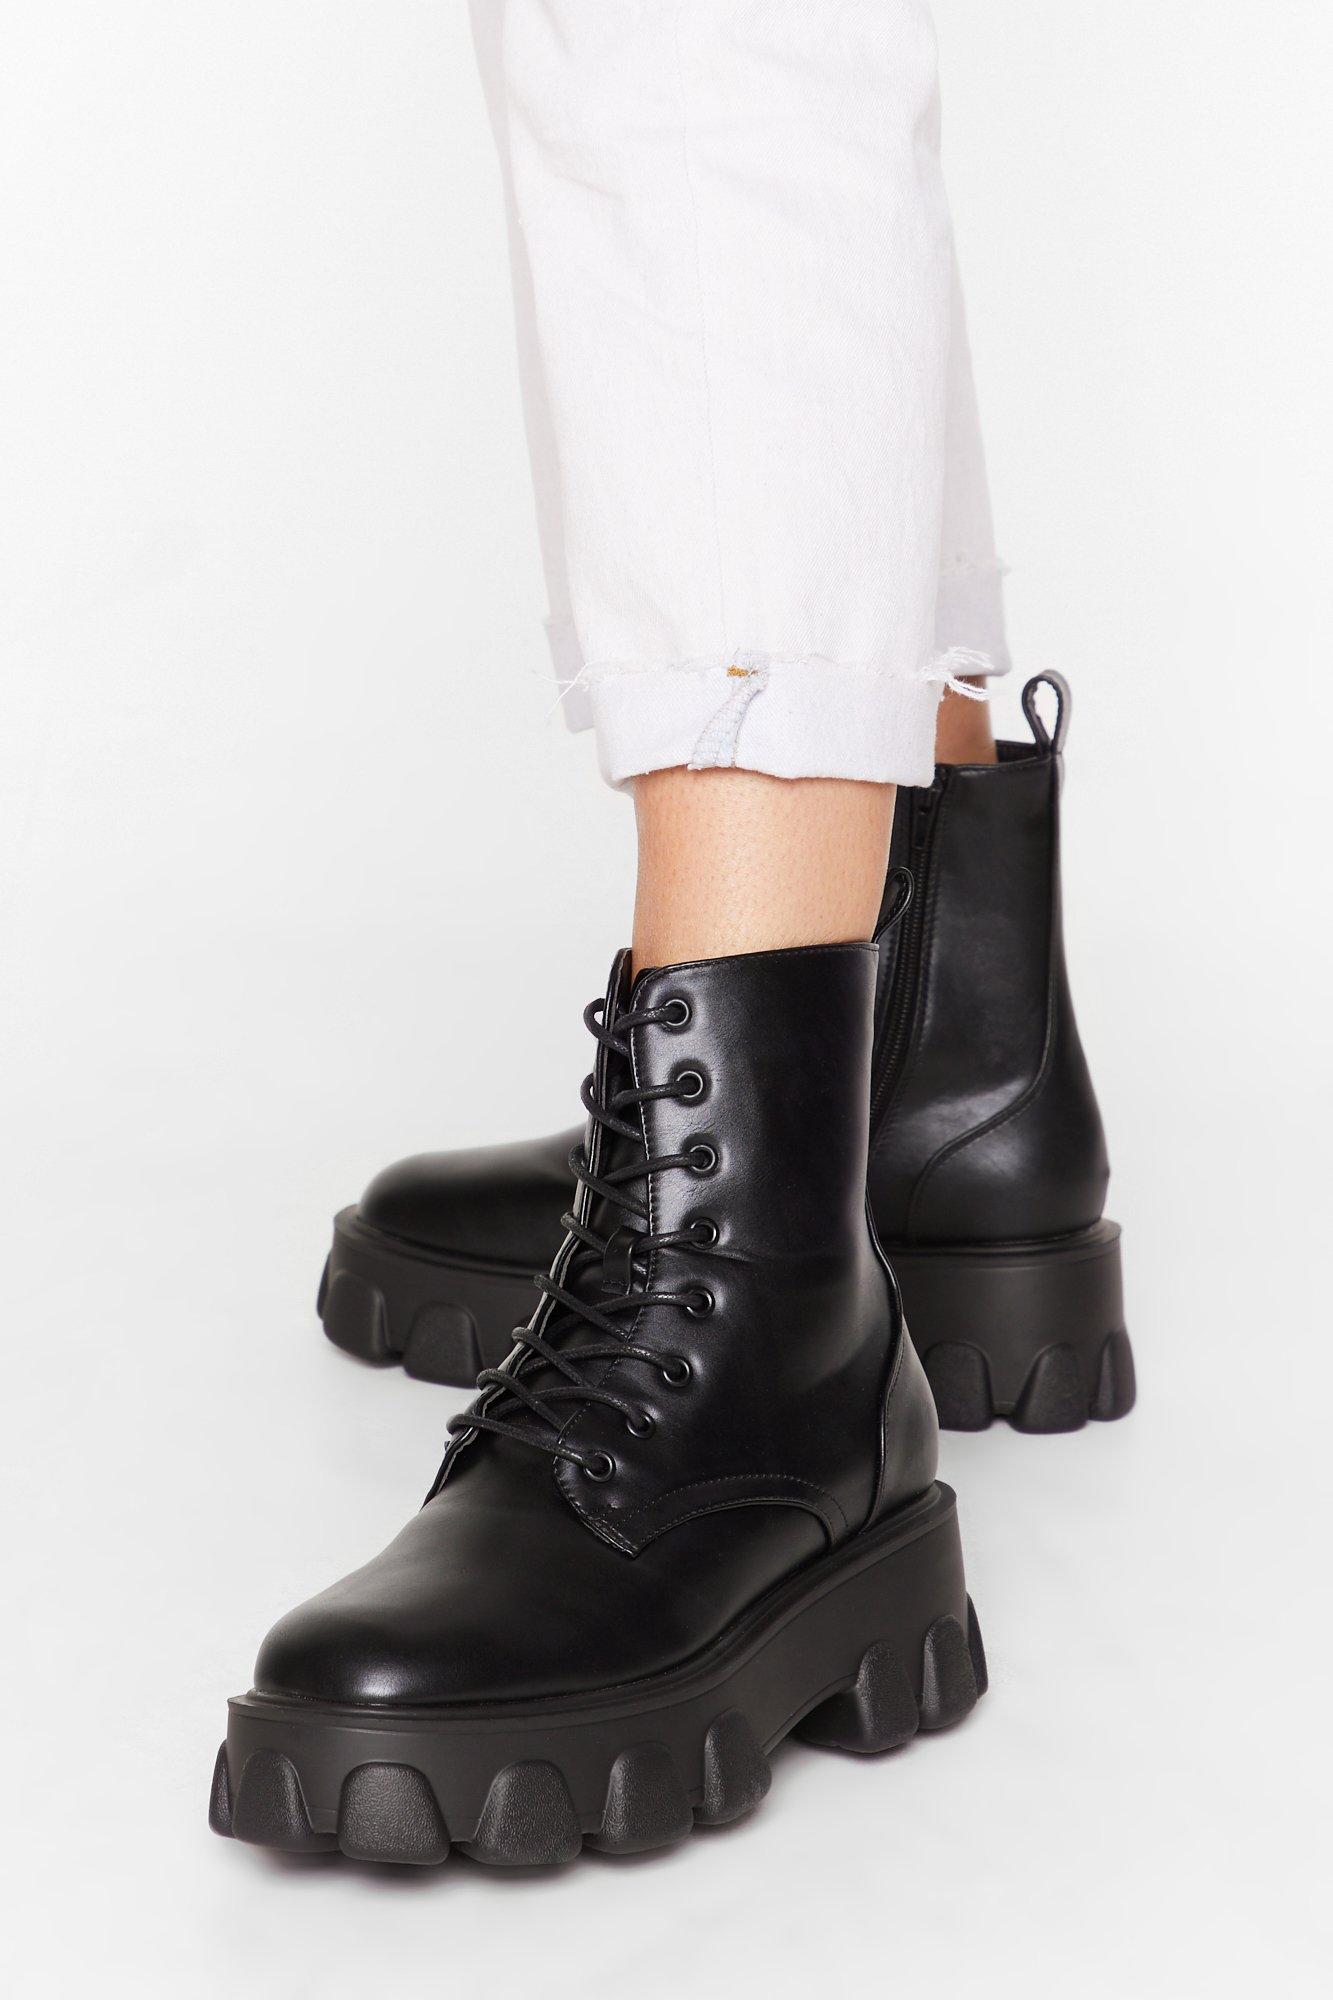 cleated platform boots